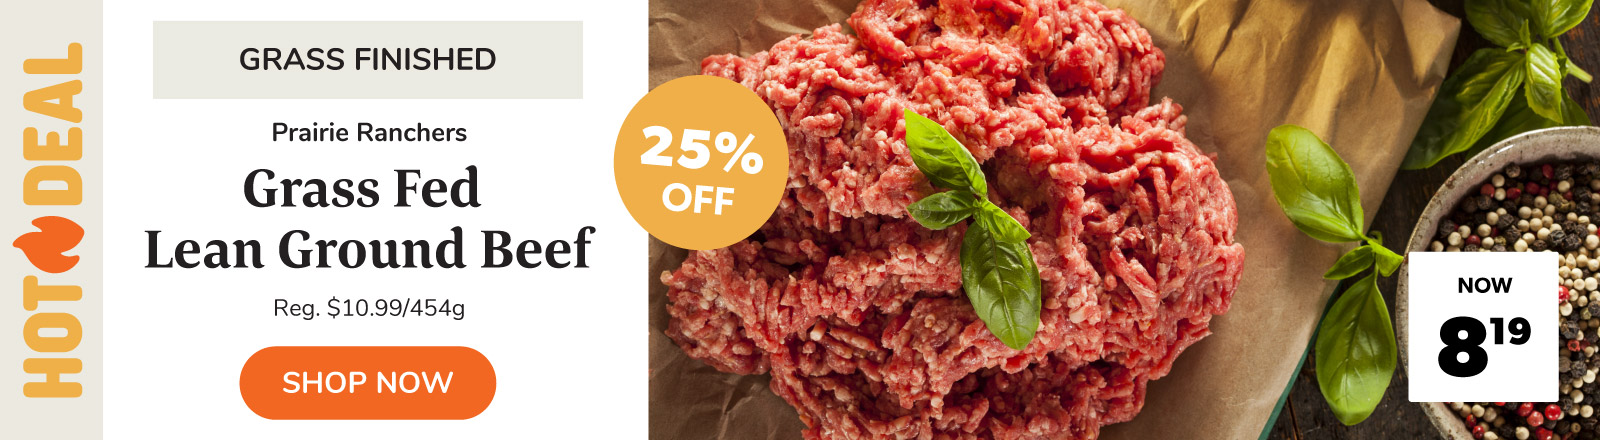 Grass Fed / Grass Finished Lean Ground Beef (Frozen) on Sale